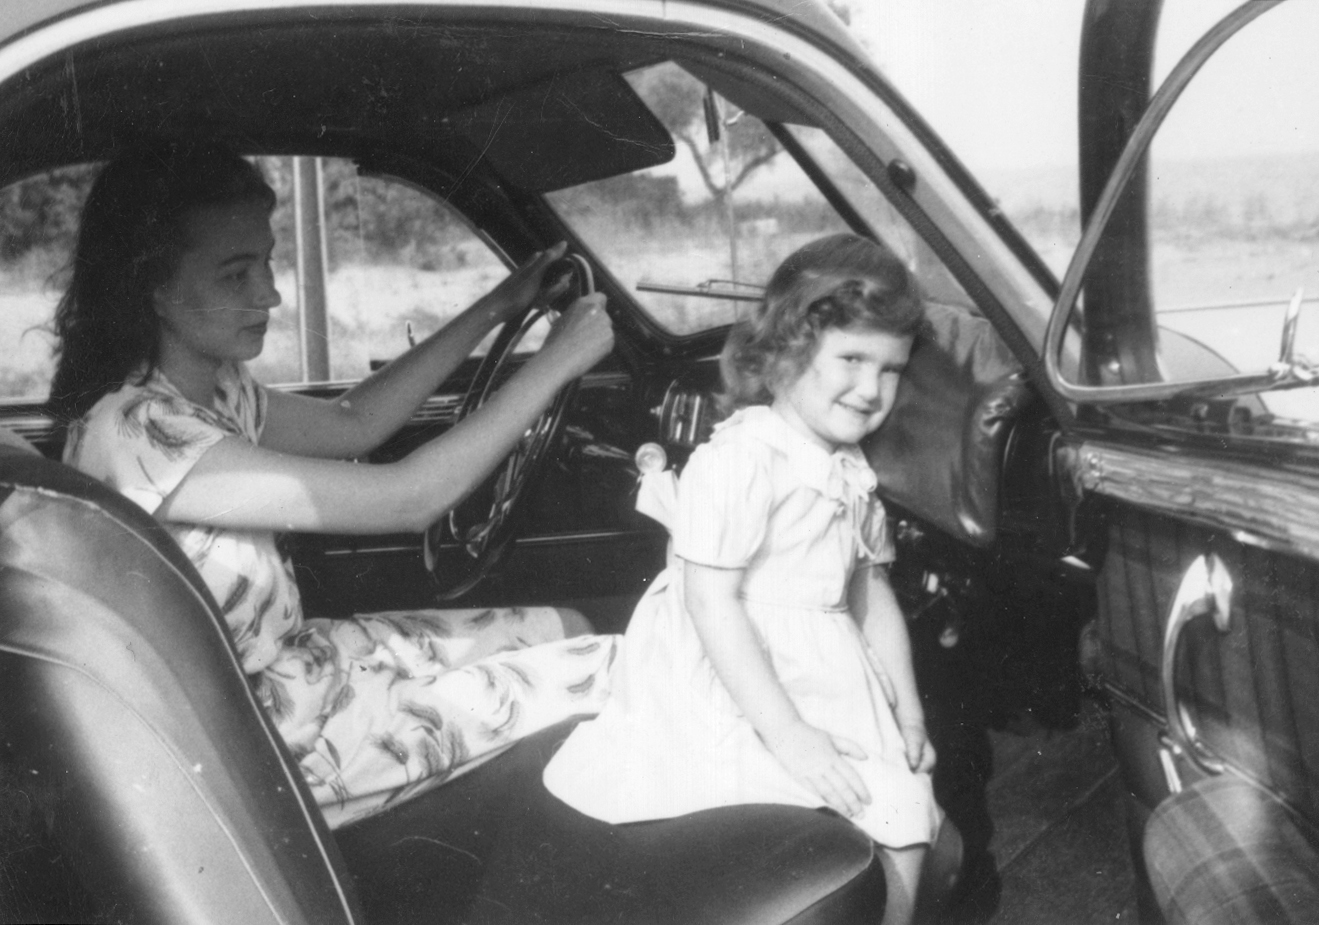 The Straith padded dashboard is demonstrated in this photo by the inventor’s daughter, Jean Straith Hepner, and granddaughter, Grace Quitzow.